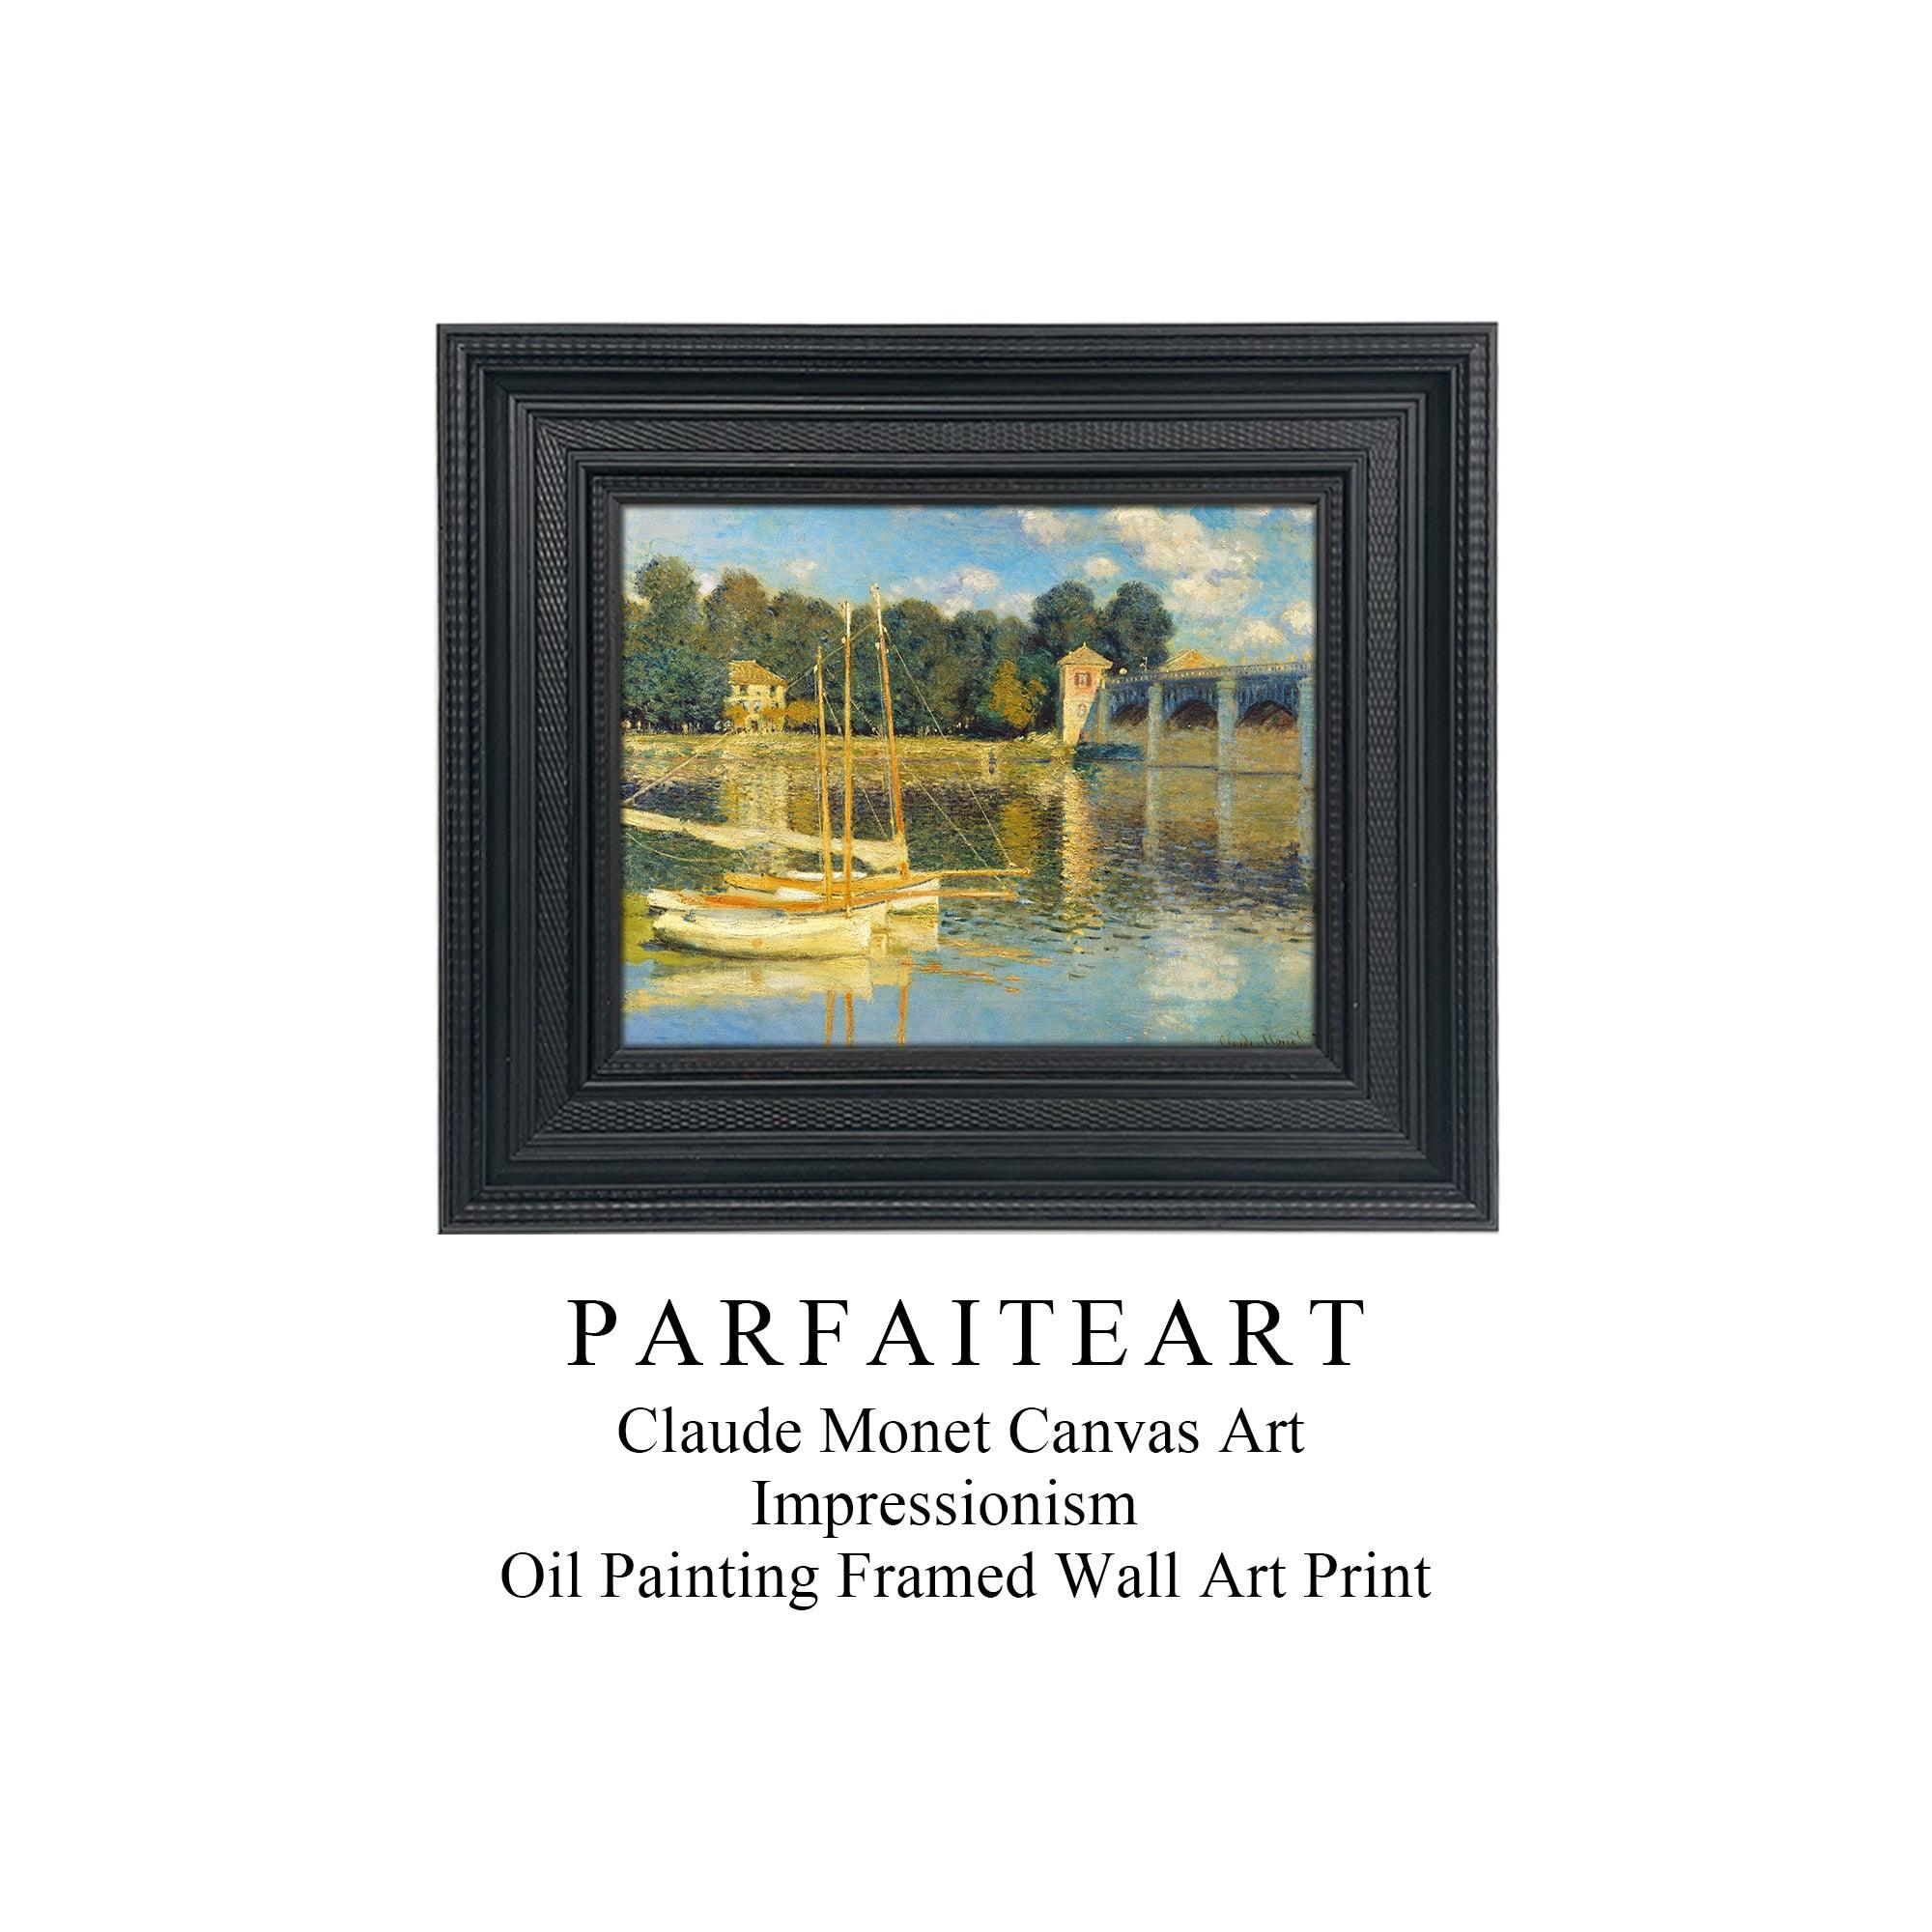 Famous Painting Print，Claude Monet，Moody Wall Decor，Black Vintage Frame,Solid Wood,High-Quality Waterproof Decorative Canvas Art， Hotel Aisle Living Room Home Decor Art 18x15 inches 4 Black